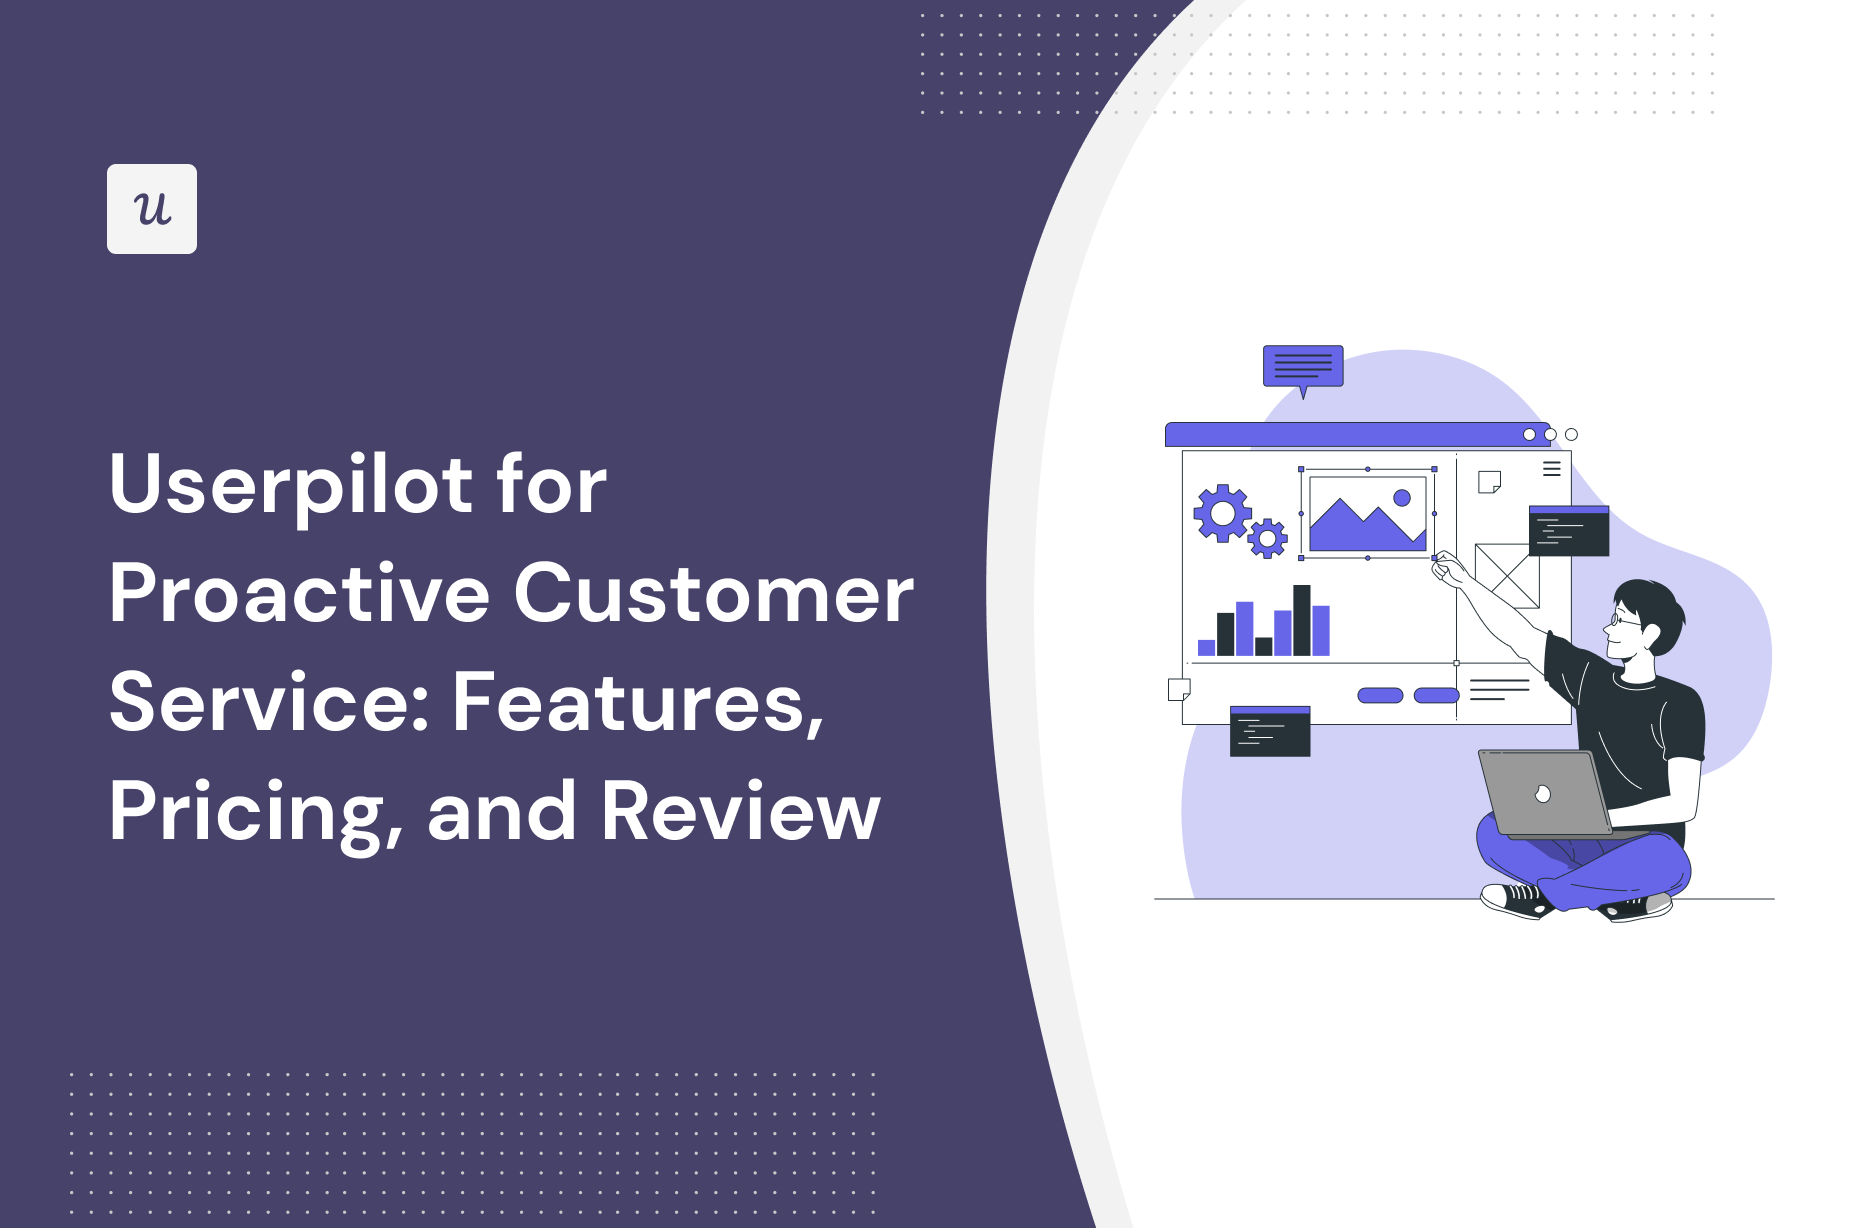 Userpilot for Proactive Customer Service: Features, Pricing, and Review